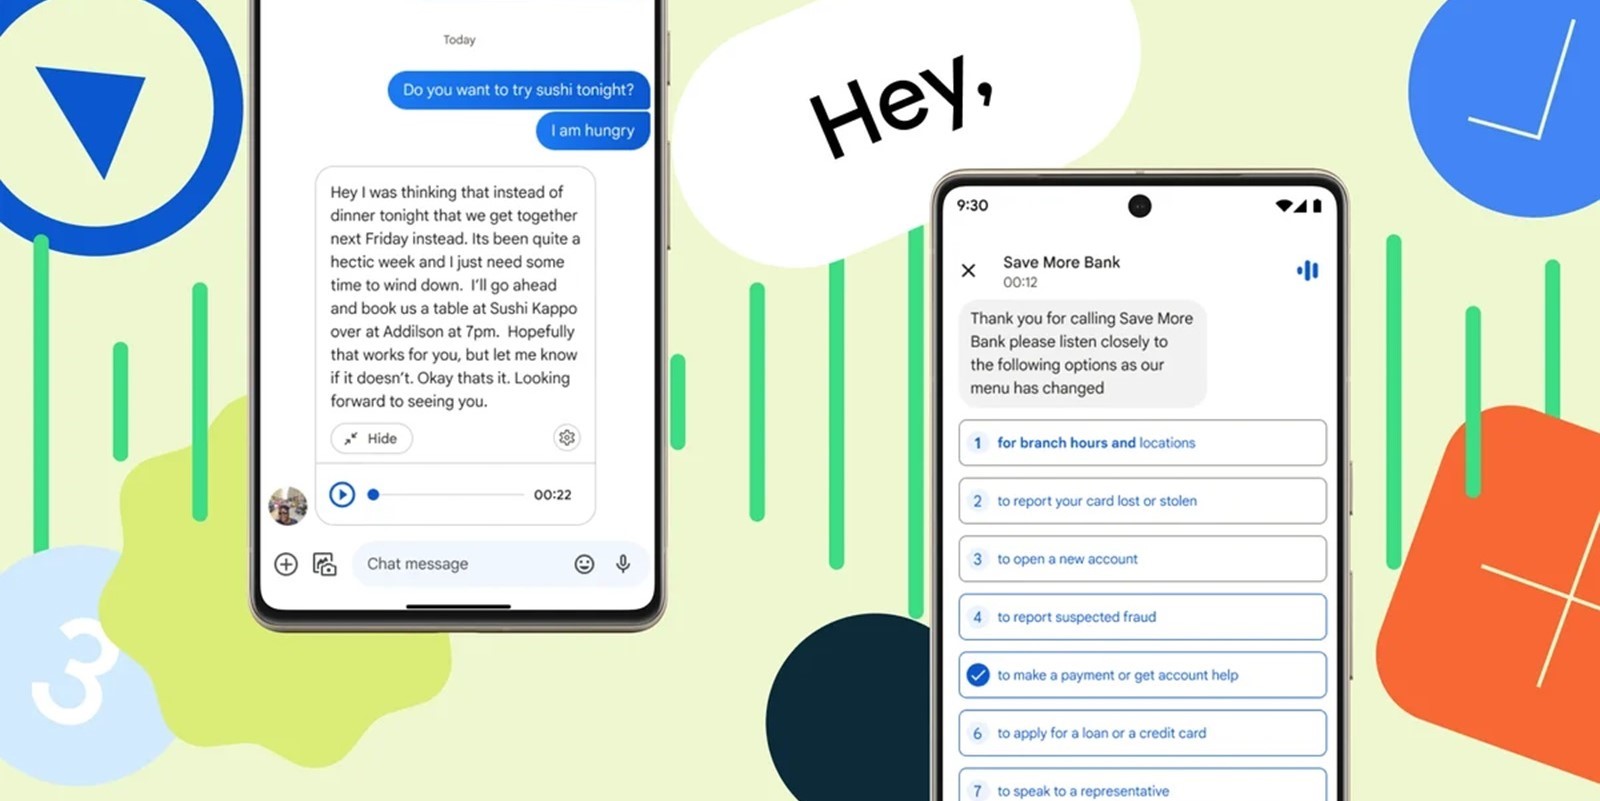 Google Messages may soon get a redesigned contact profile UI and text input bar